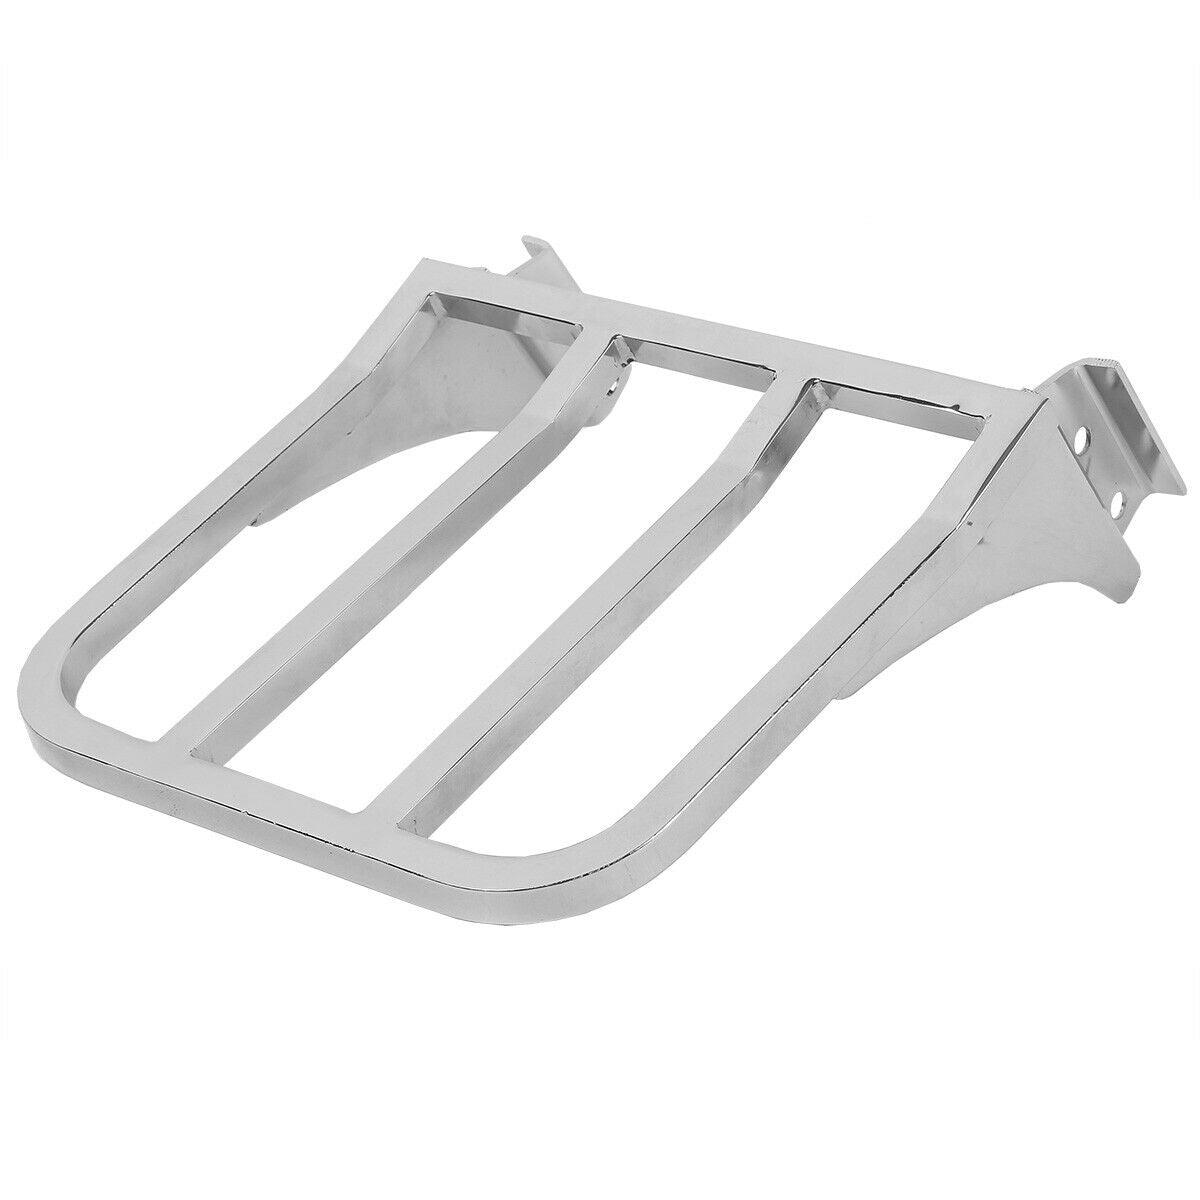 Chrome Sissy Bar Backrest Luggage Rack Fit For Harley Sportster XL Dyna Softail - Moto Life Products